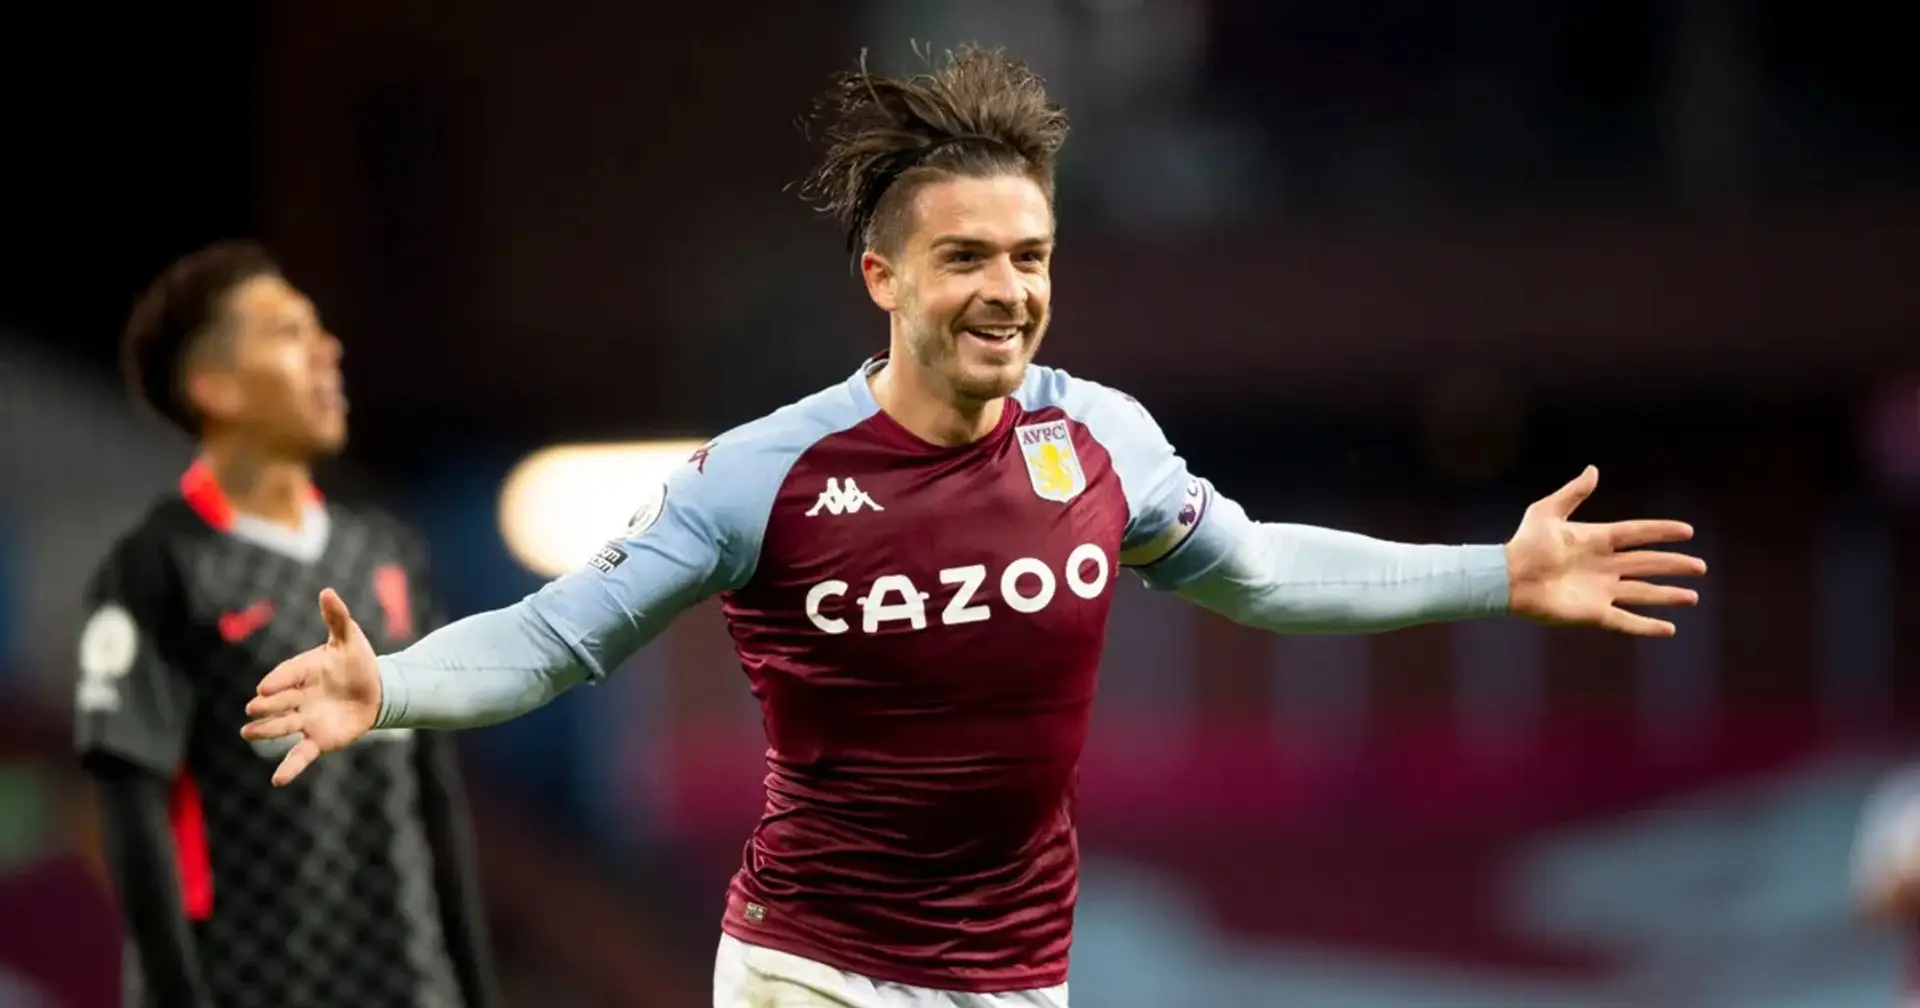 'ESR could play a Ramsey-esque role if we got him': Grealish Instagram exchange with Saka gets Arsenal fans dreaming